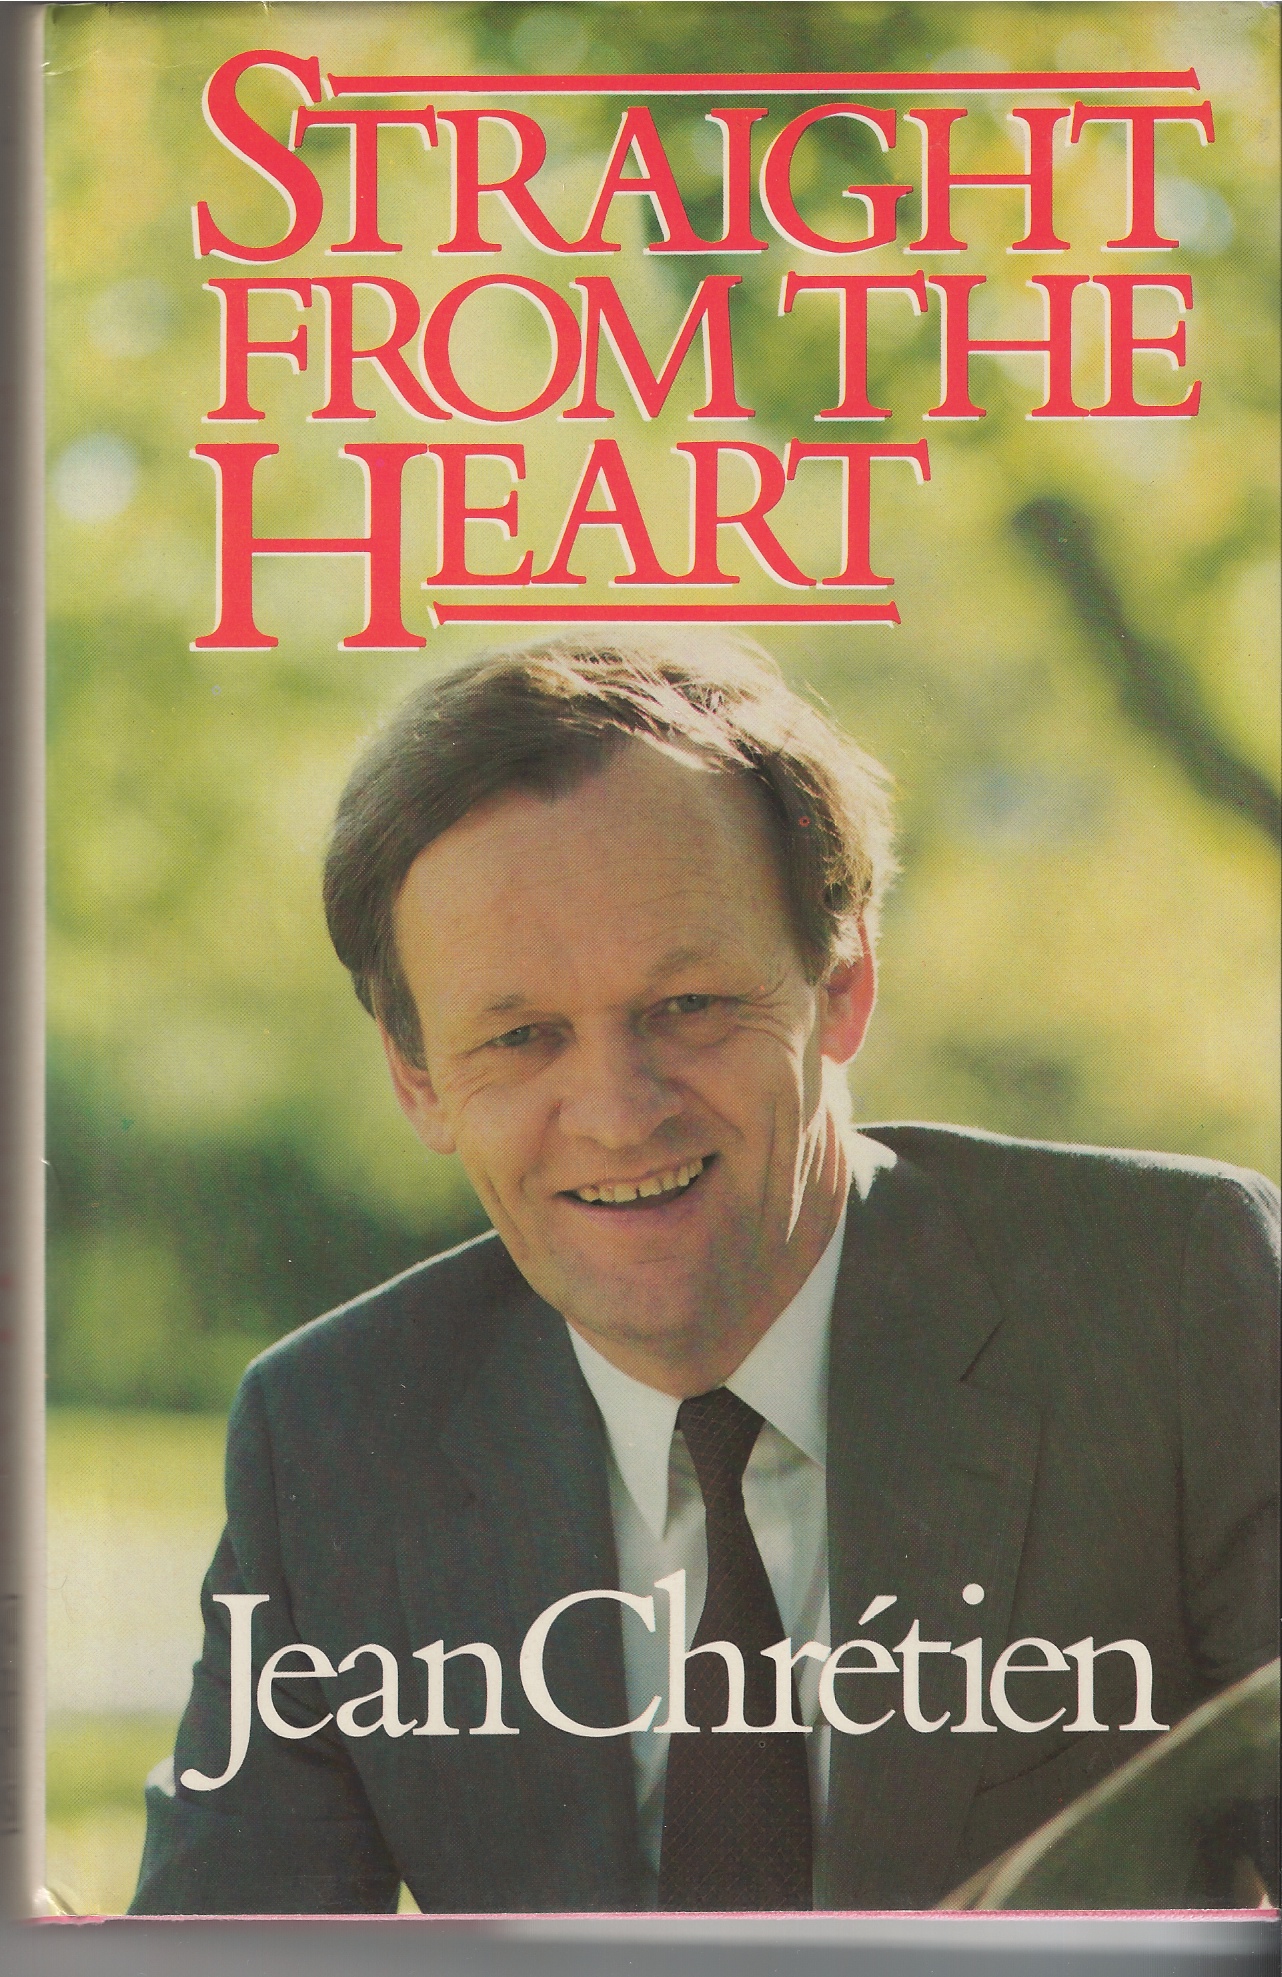 CHRETIEN JEAN - Straight from the Heart